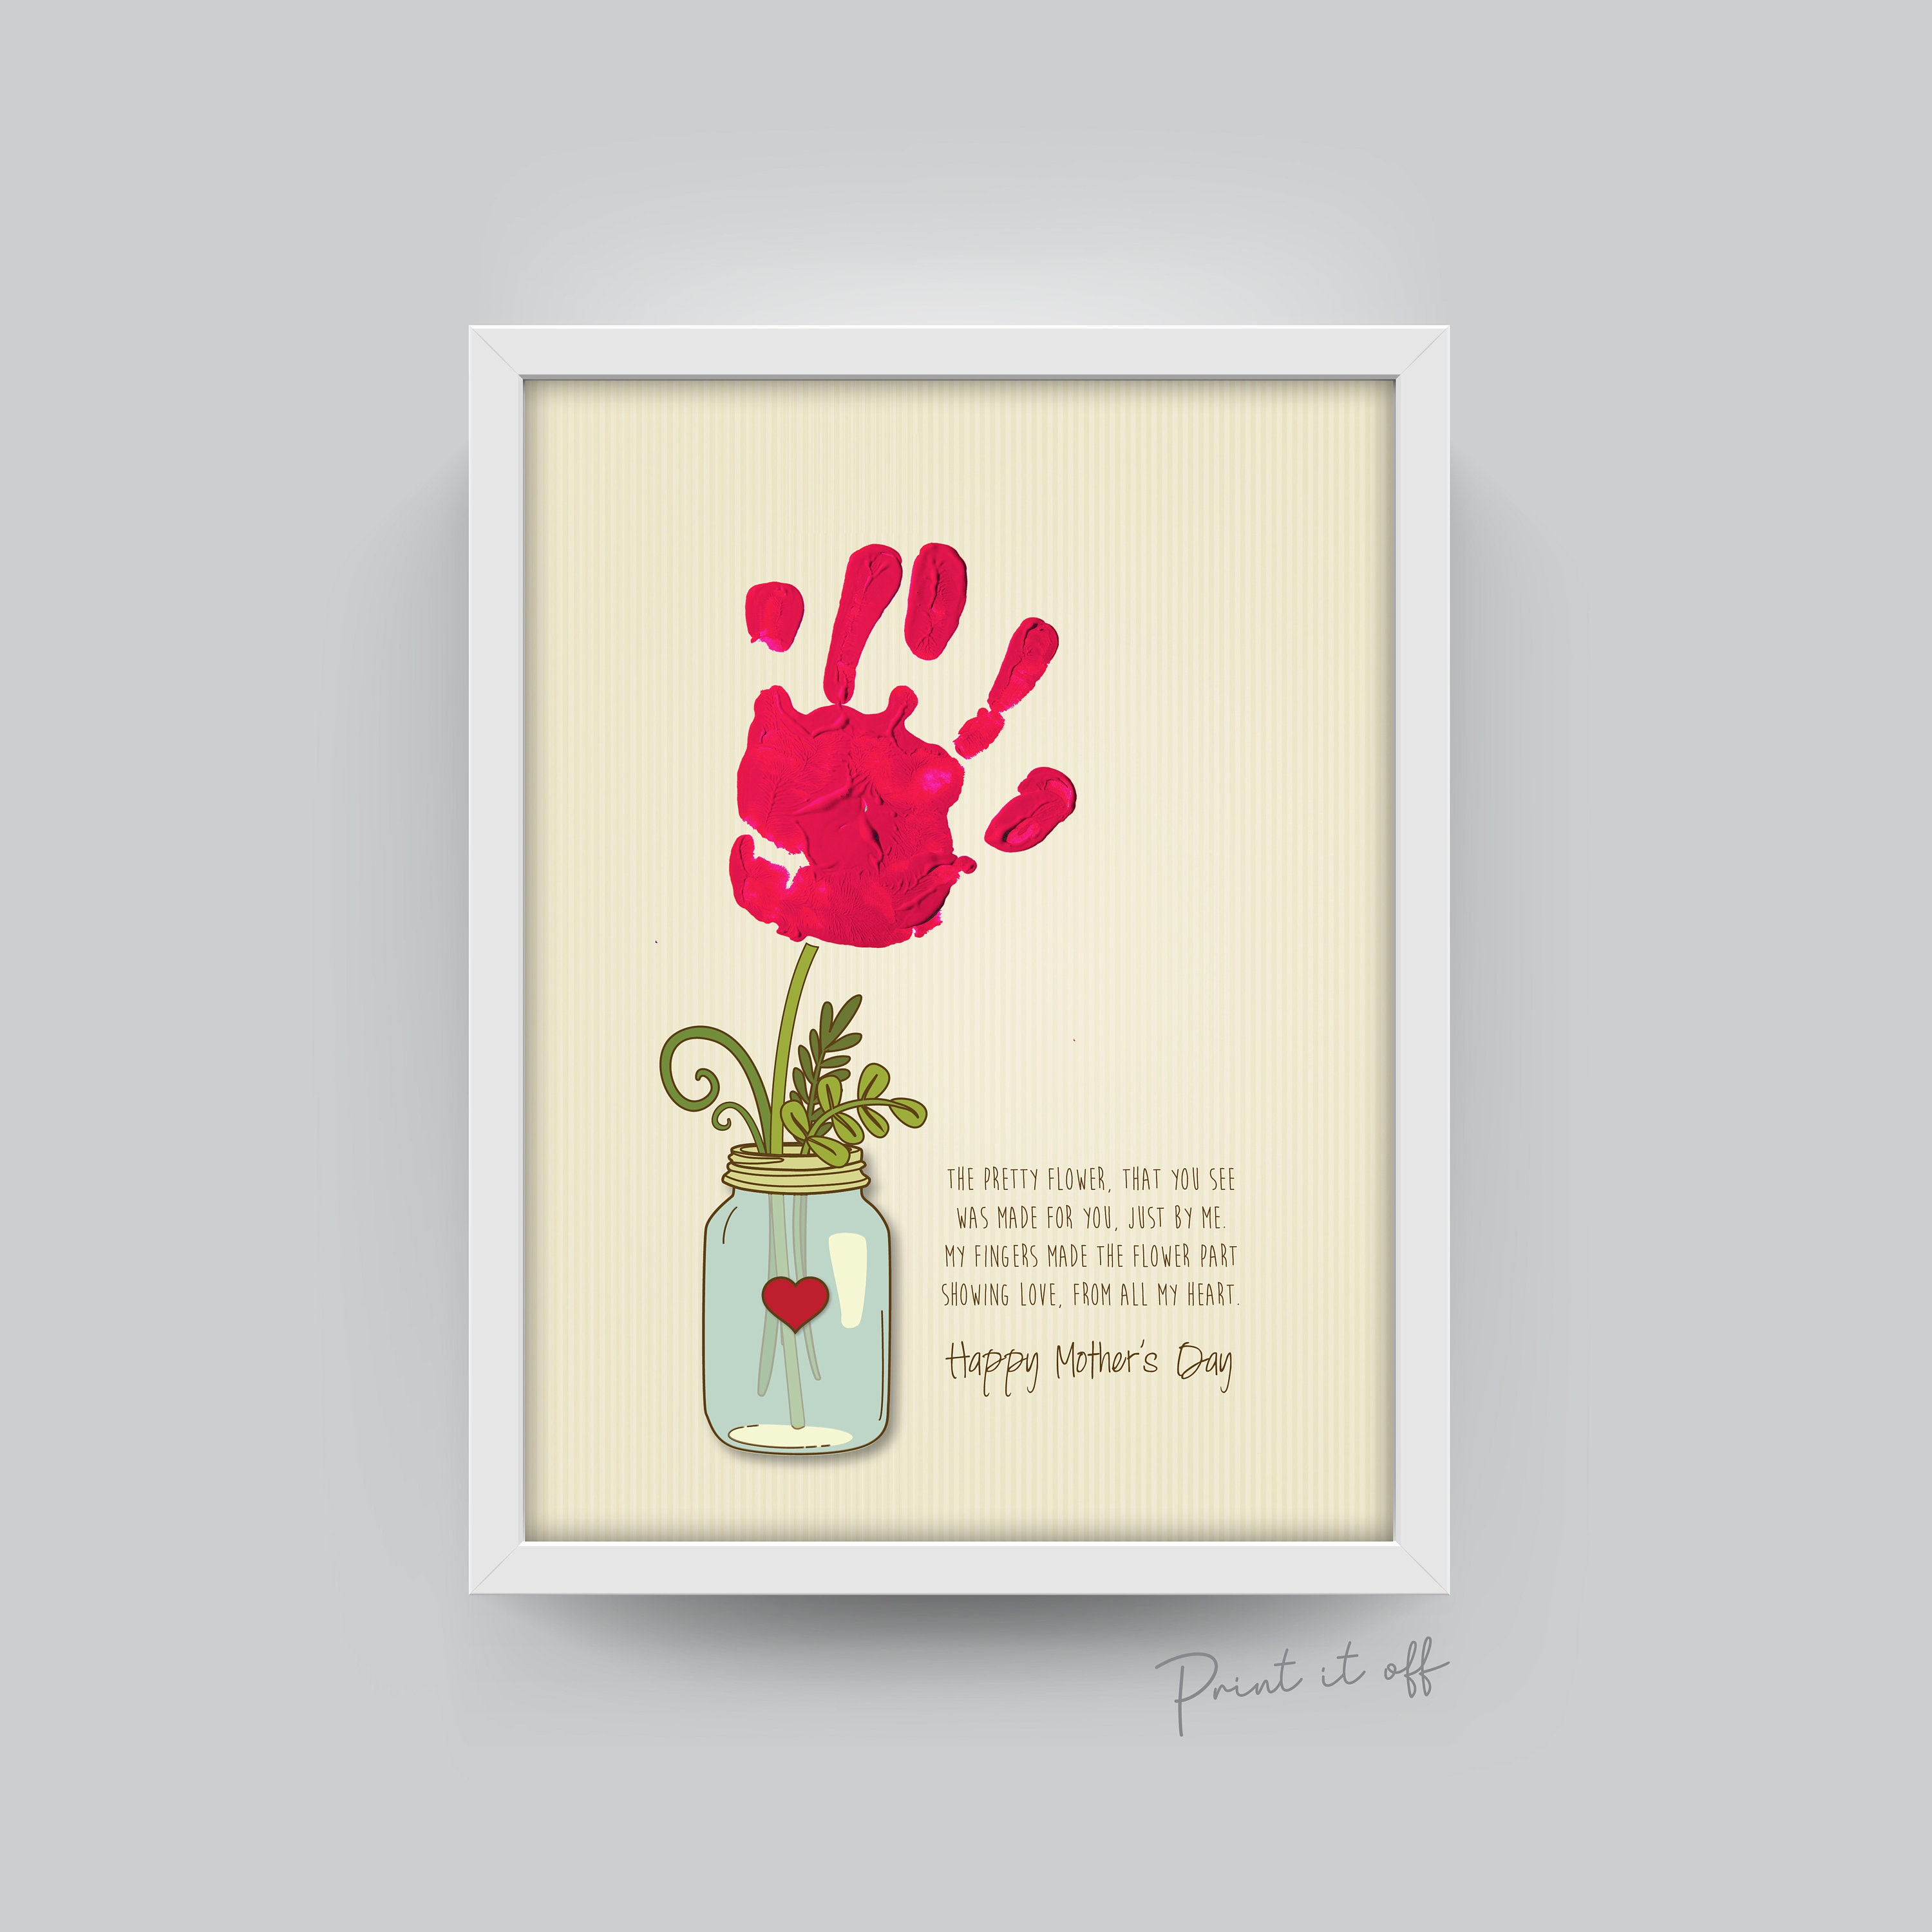 You are Totally Roarsome Mother's Day Dino Handprint -  Portugal